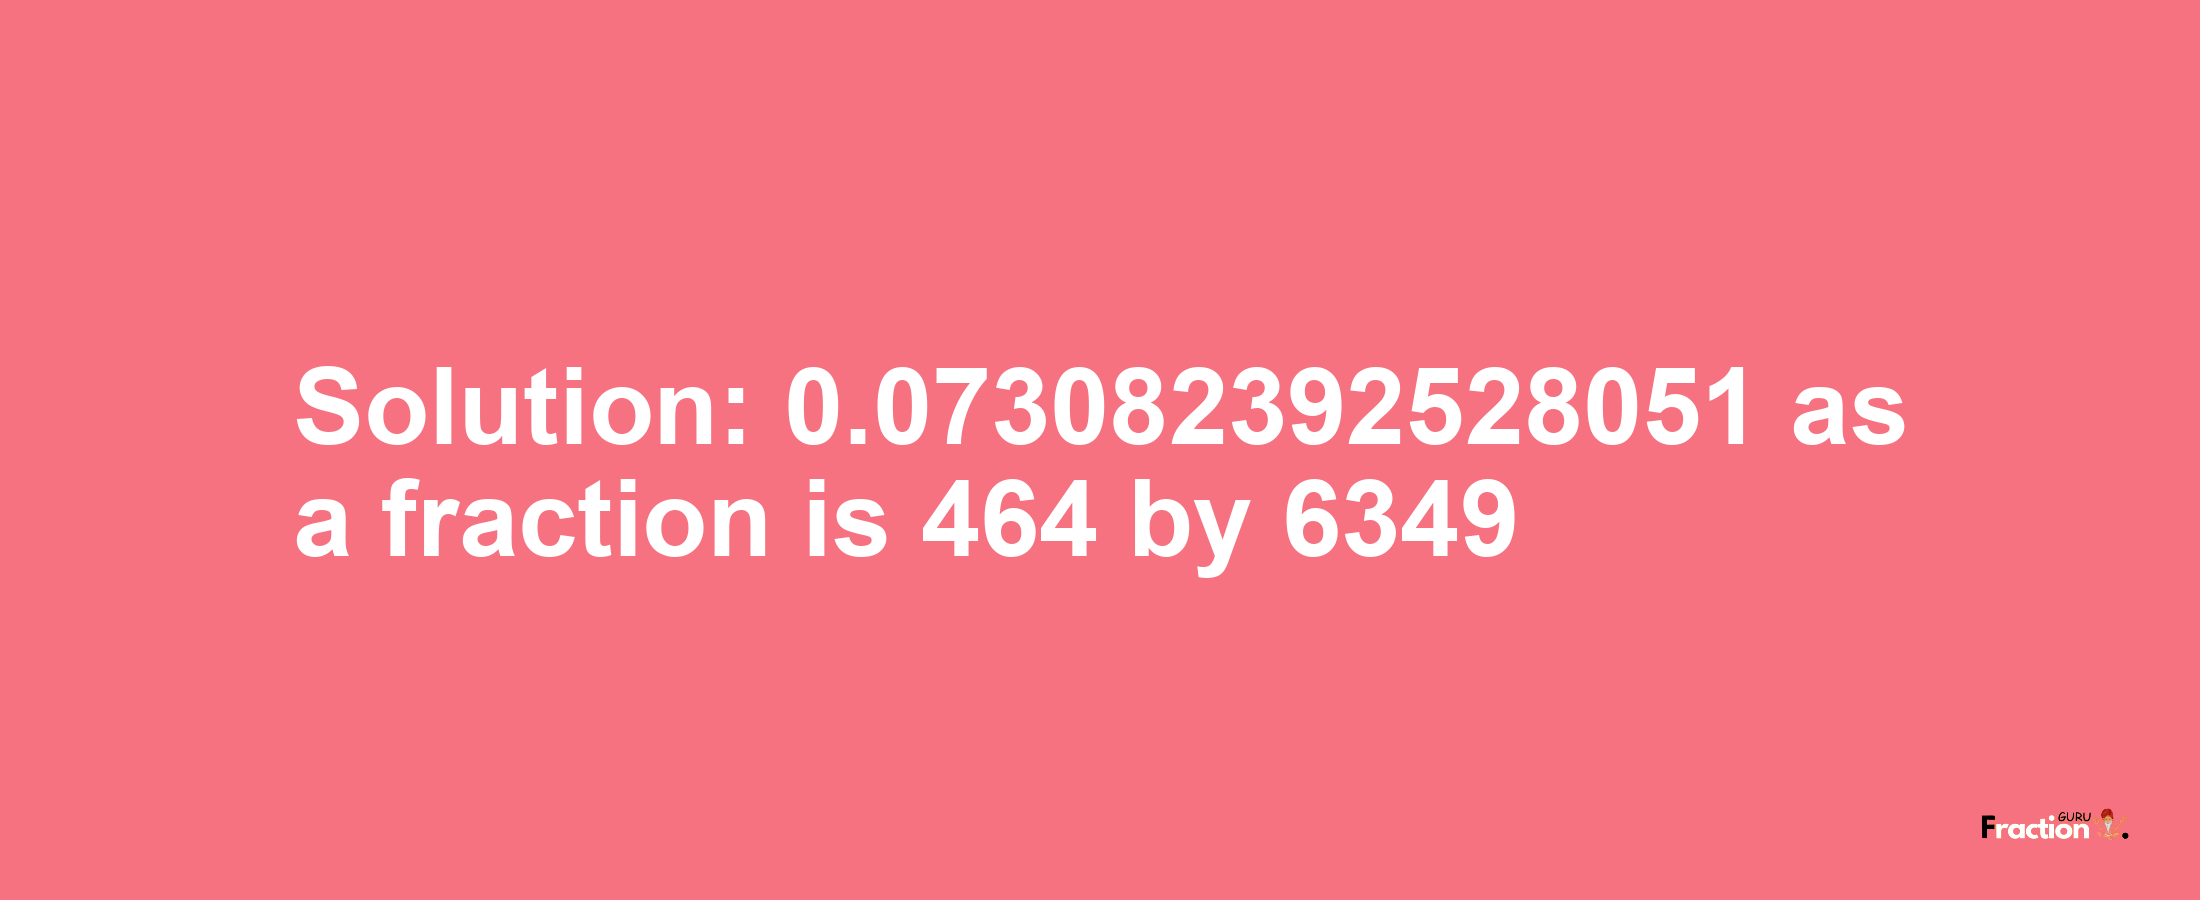 Solution:0.073082392528051 as a fraction is 464/6349